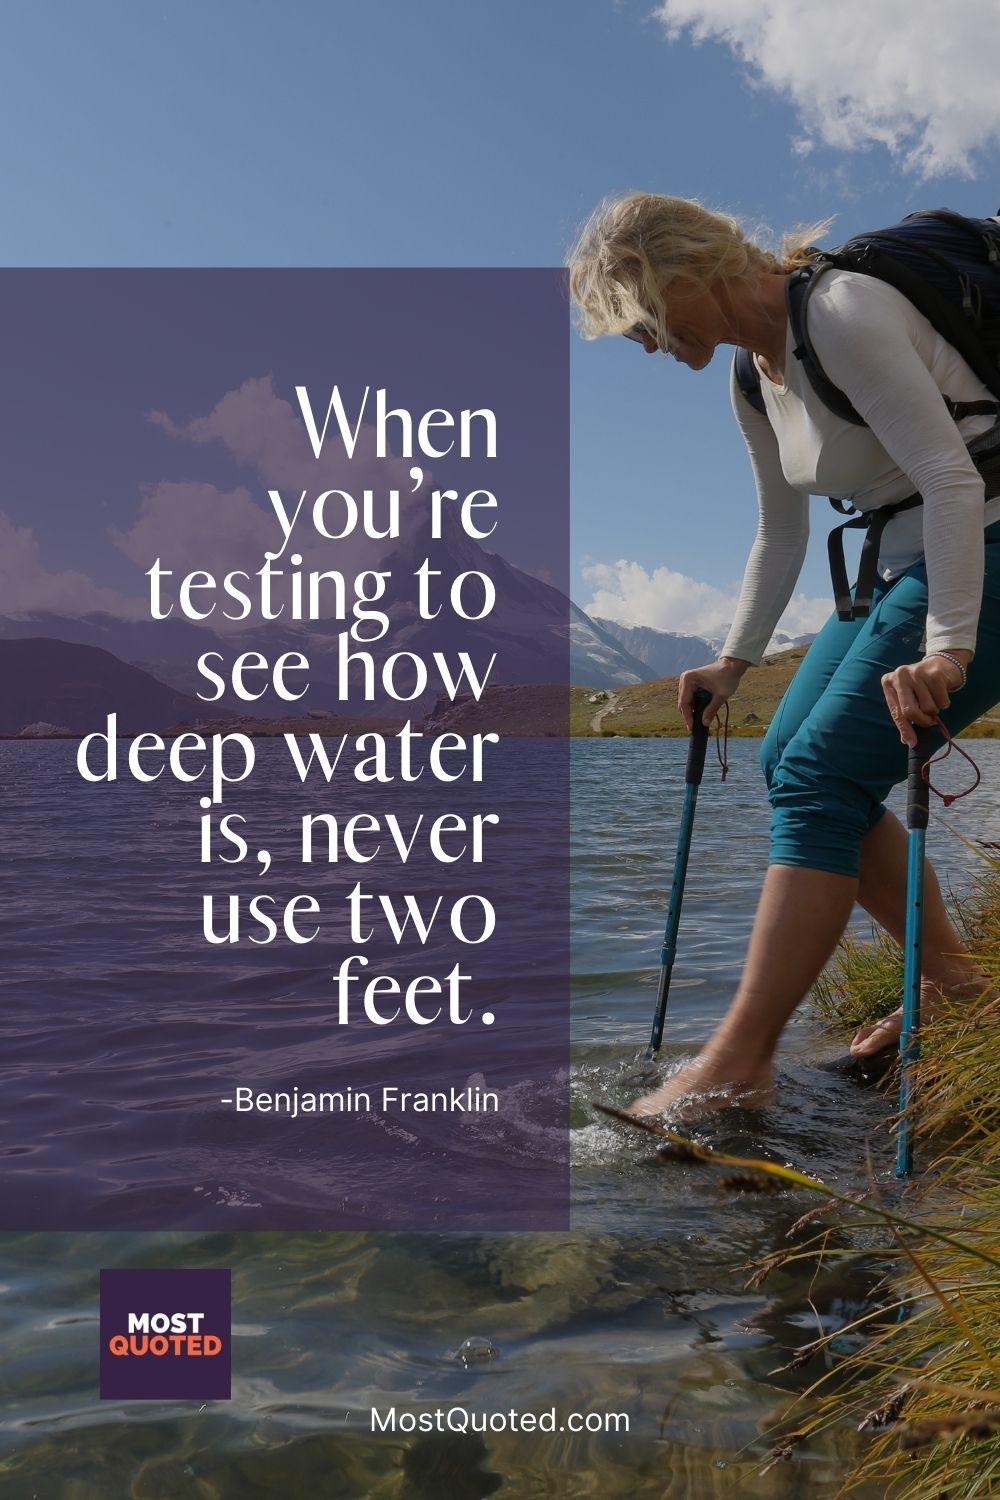 When you’re testing to see how deep water is, never use two feet. - Benjamin Franklin